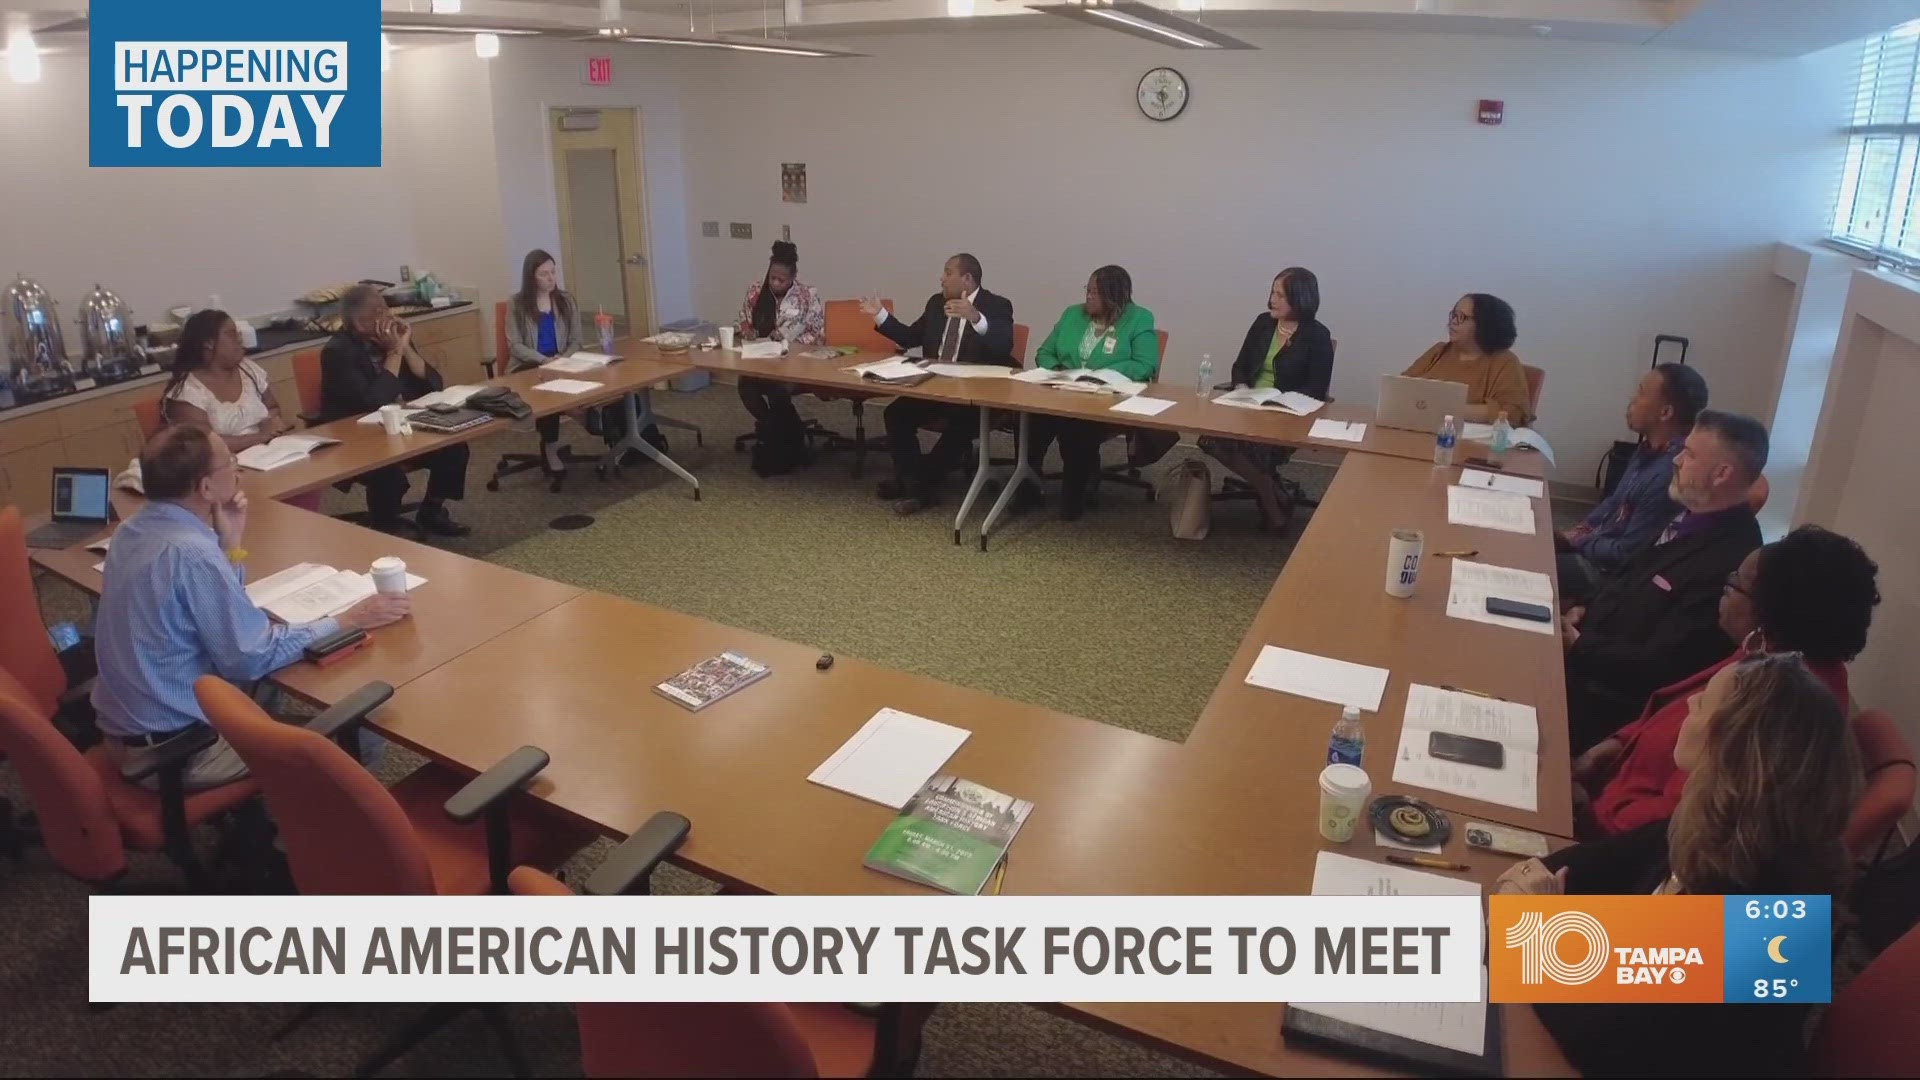 Members of Florida’s African American History Task Force were at odds over the state’s altered agenda for the group’s most important event of the year.